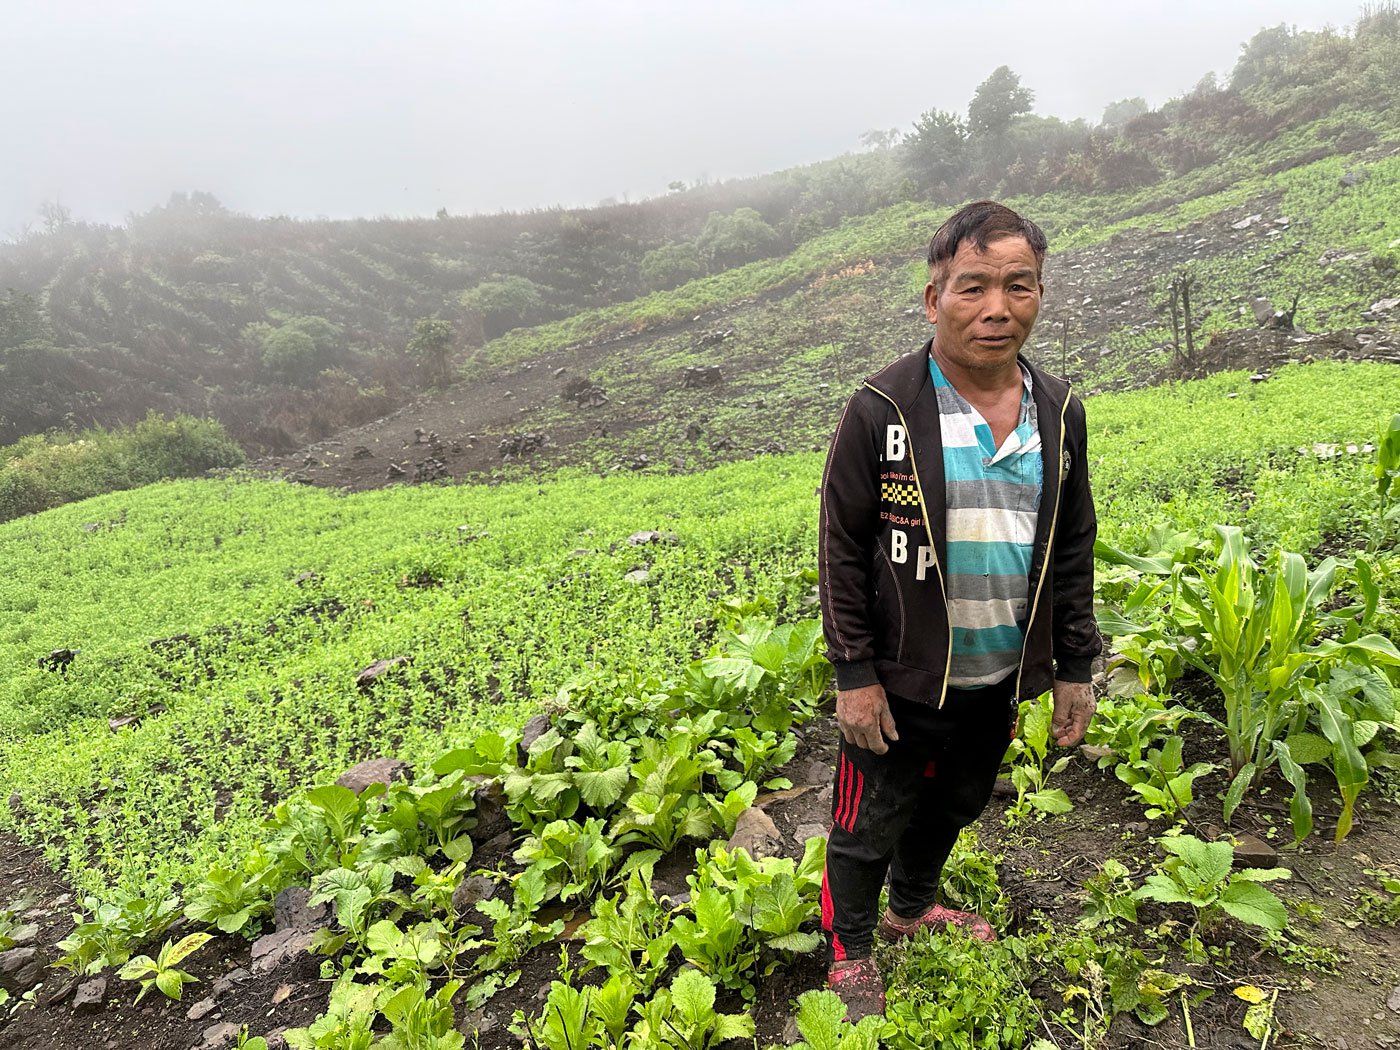 Demza, a farmer who used to earn up to three lakh rupees annually growing poppy, stands next to his farm where he grows cabbage, bananas and potatoes that he says is not enough to support his family, particularly his children's education